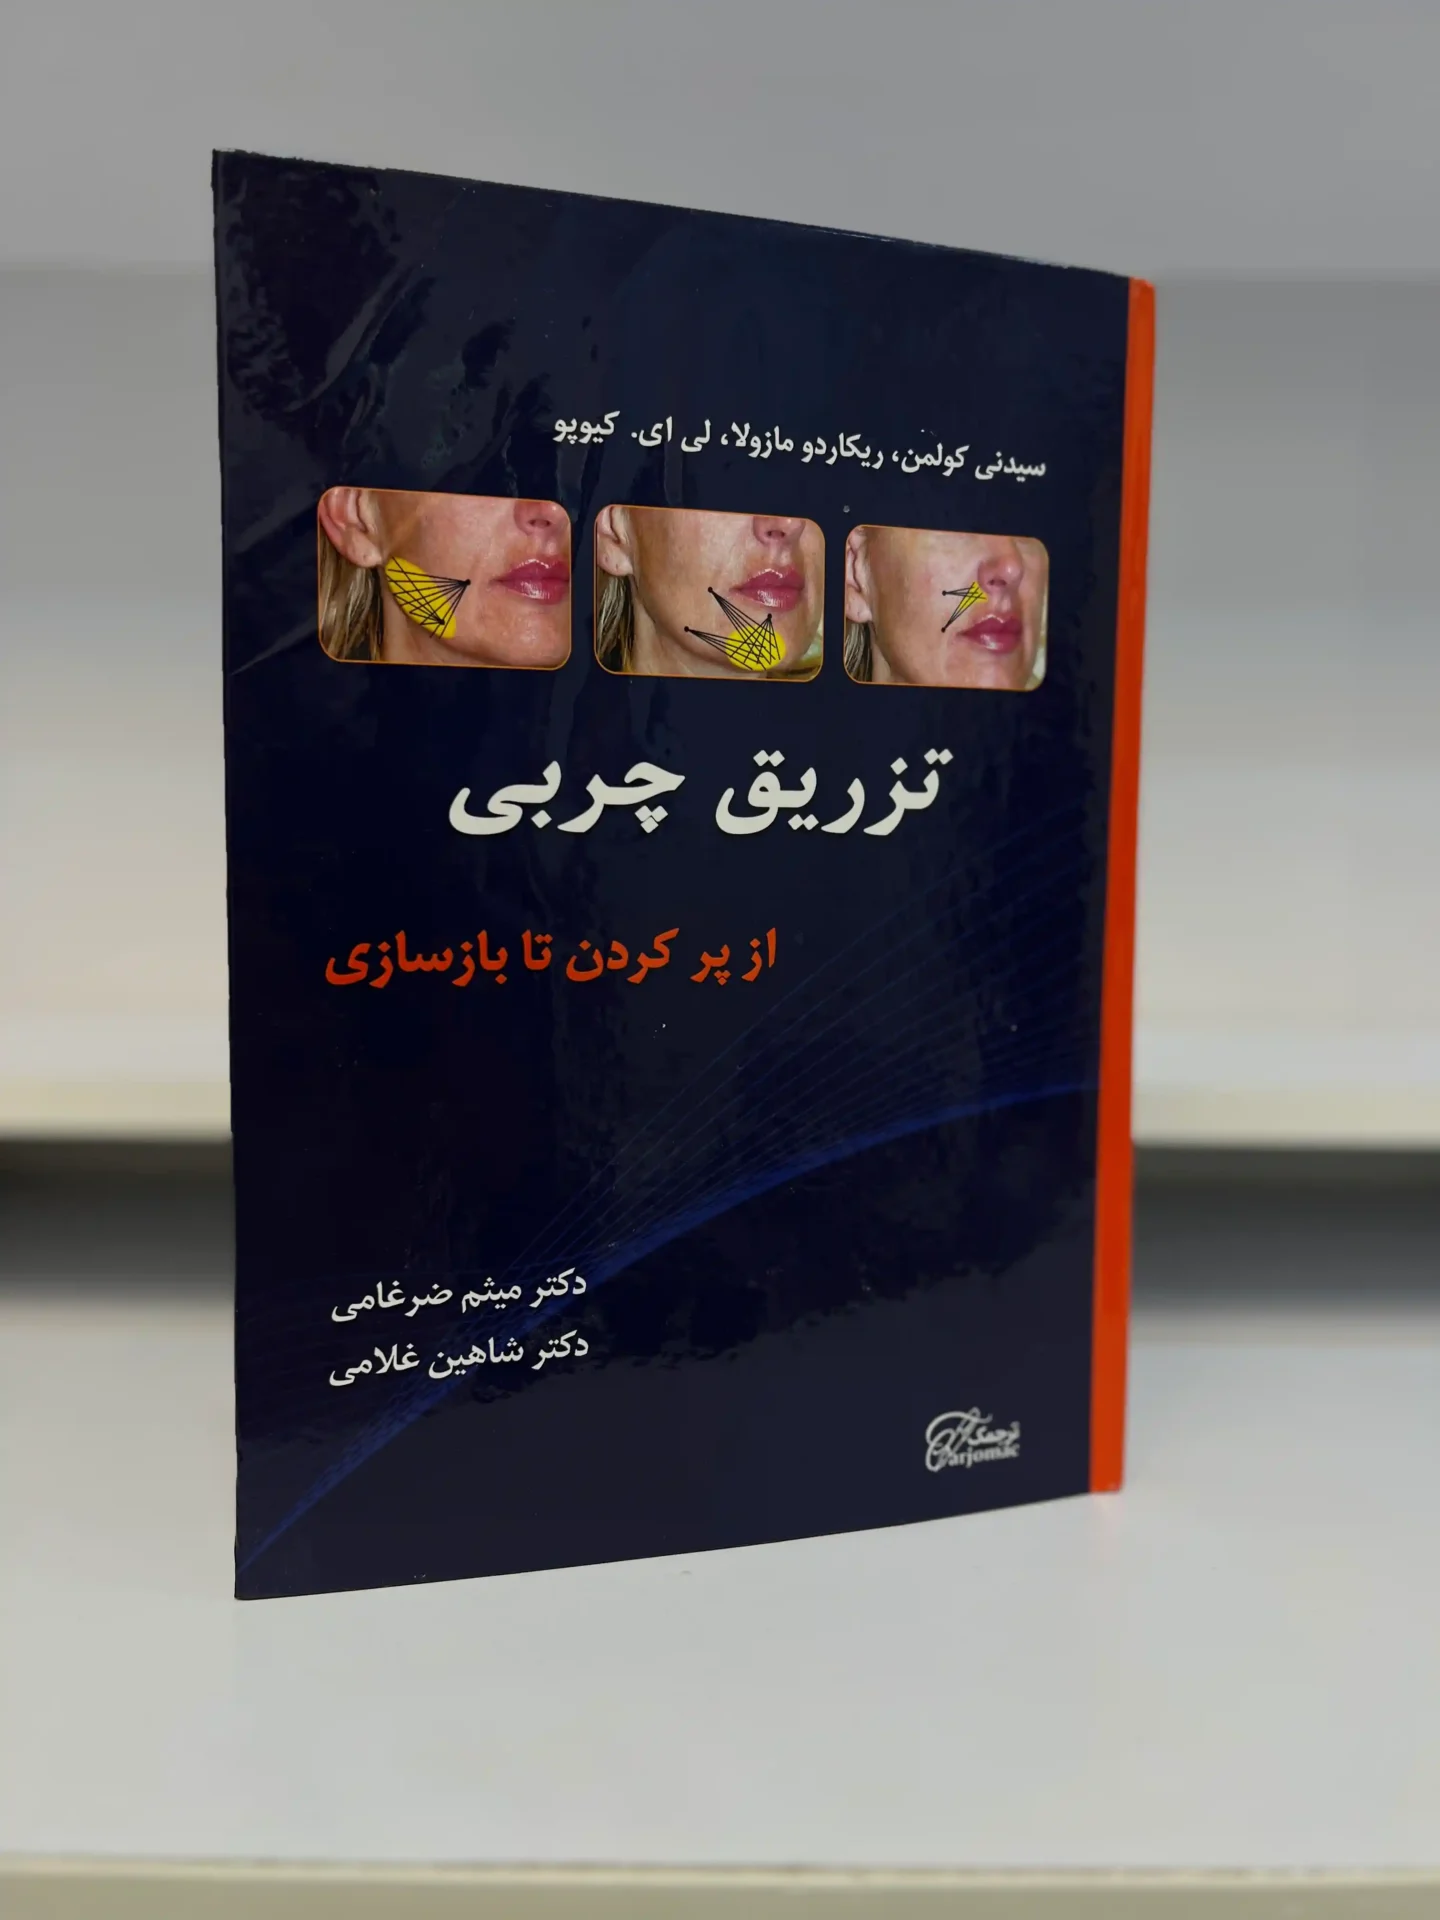 Dr. Zarghami's fat injection book